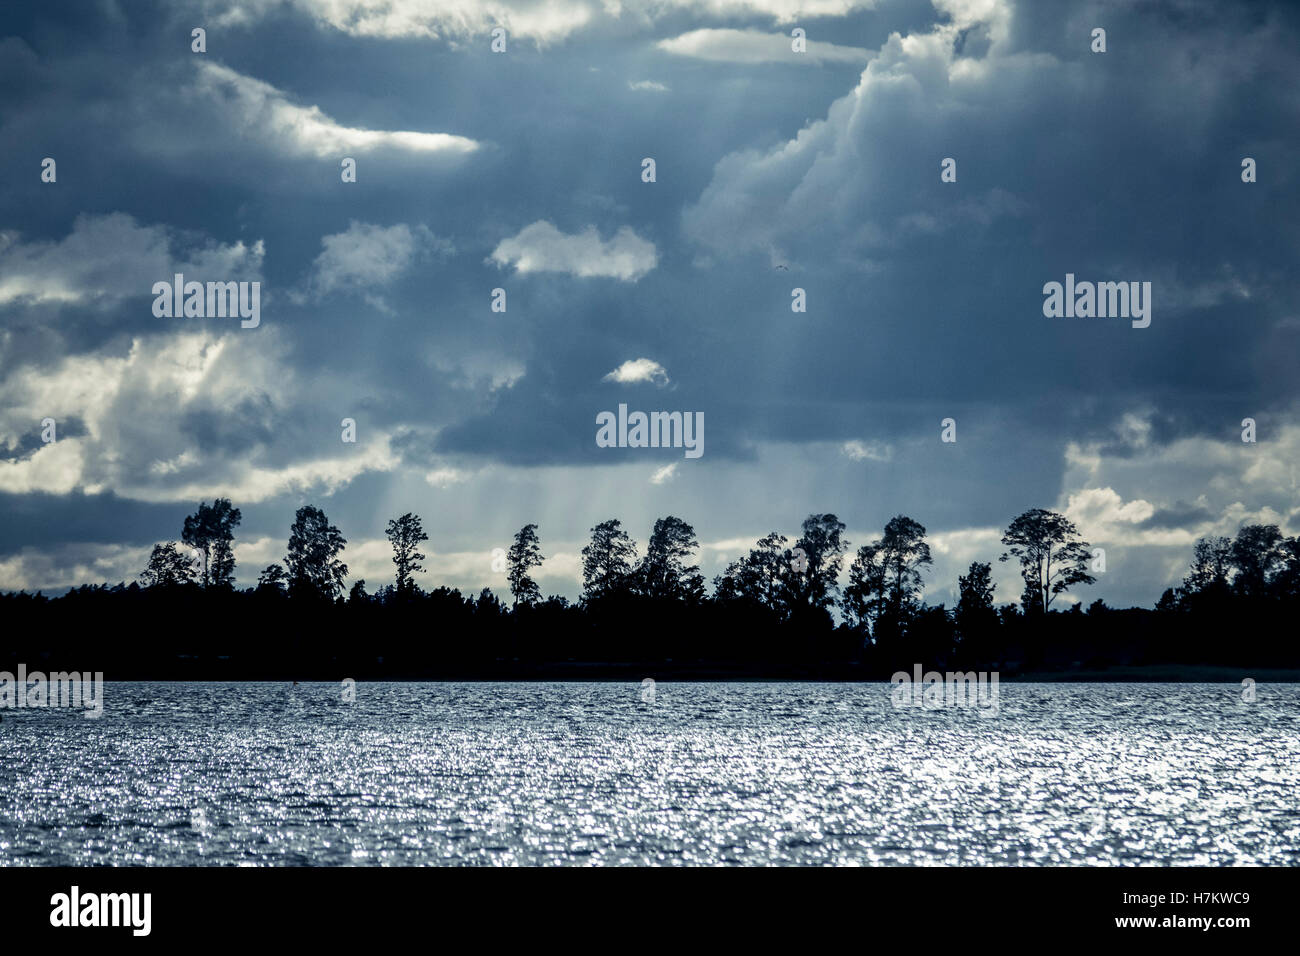 Lake and trees in silhouette at night with dramatic sky. Landscape in Sweden. Nature scene background in blue color tones. Stock Photo